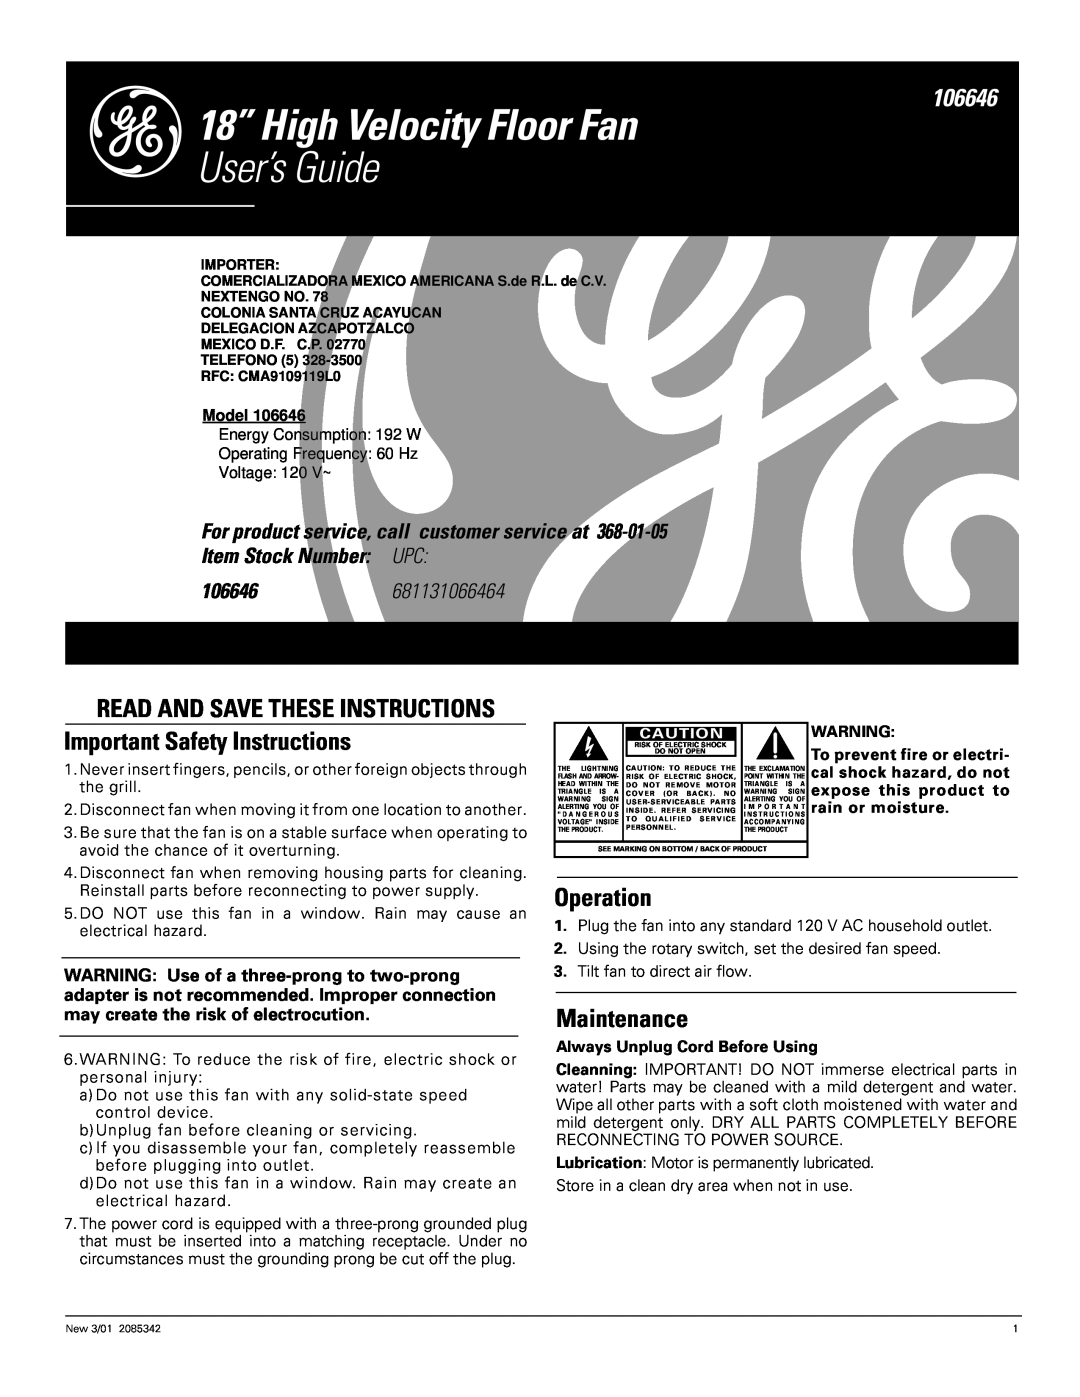 GE important safety instructions e18” High Velocity Floor Fan, Operation, Maintenance, User’s Guide, 681131066464 